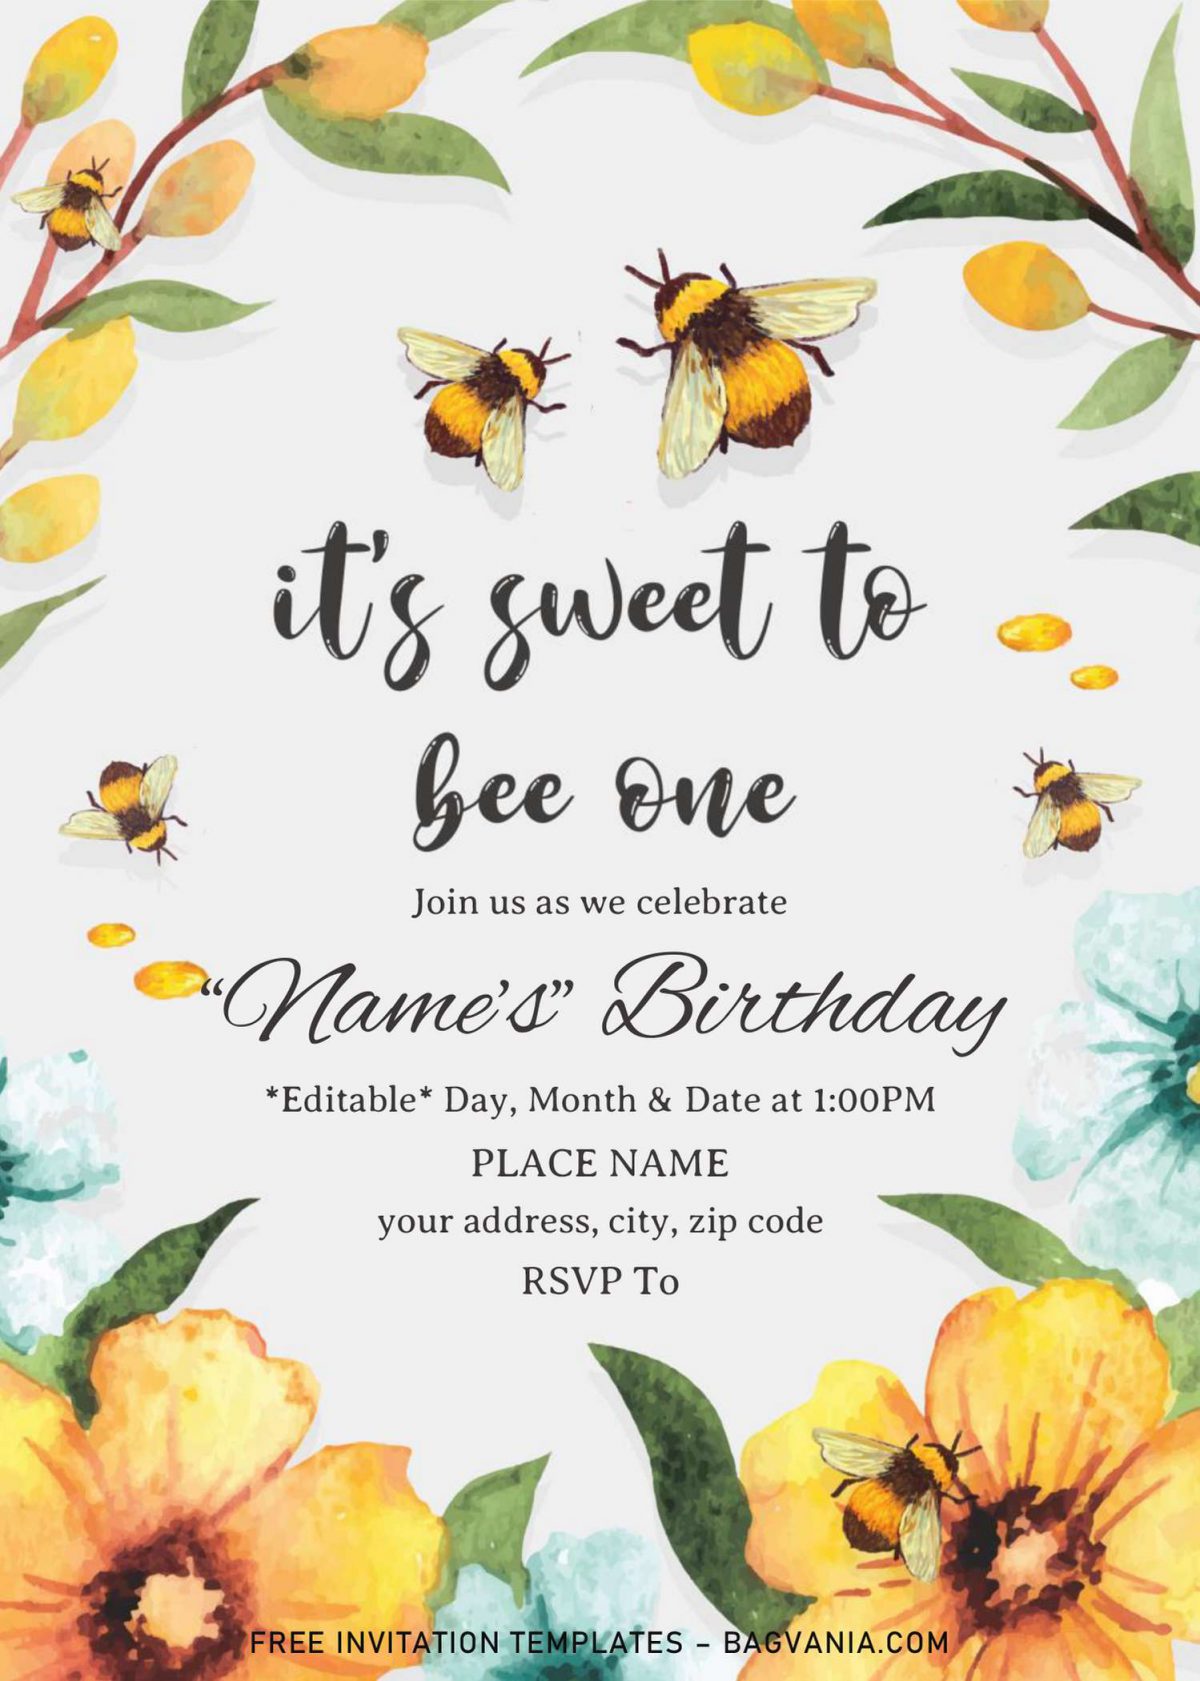 First Bee Day Birthday Invitation Templates - Editable .Docx and has watercolor sunflowers